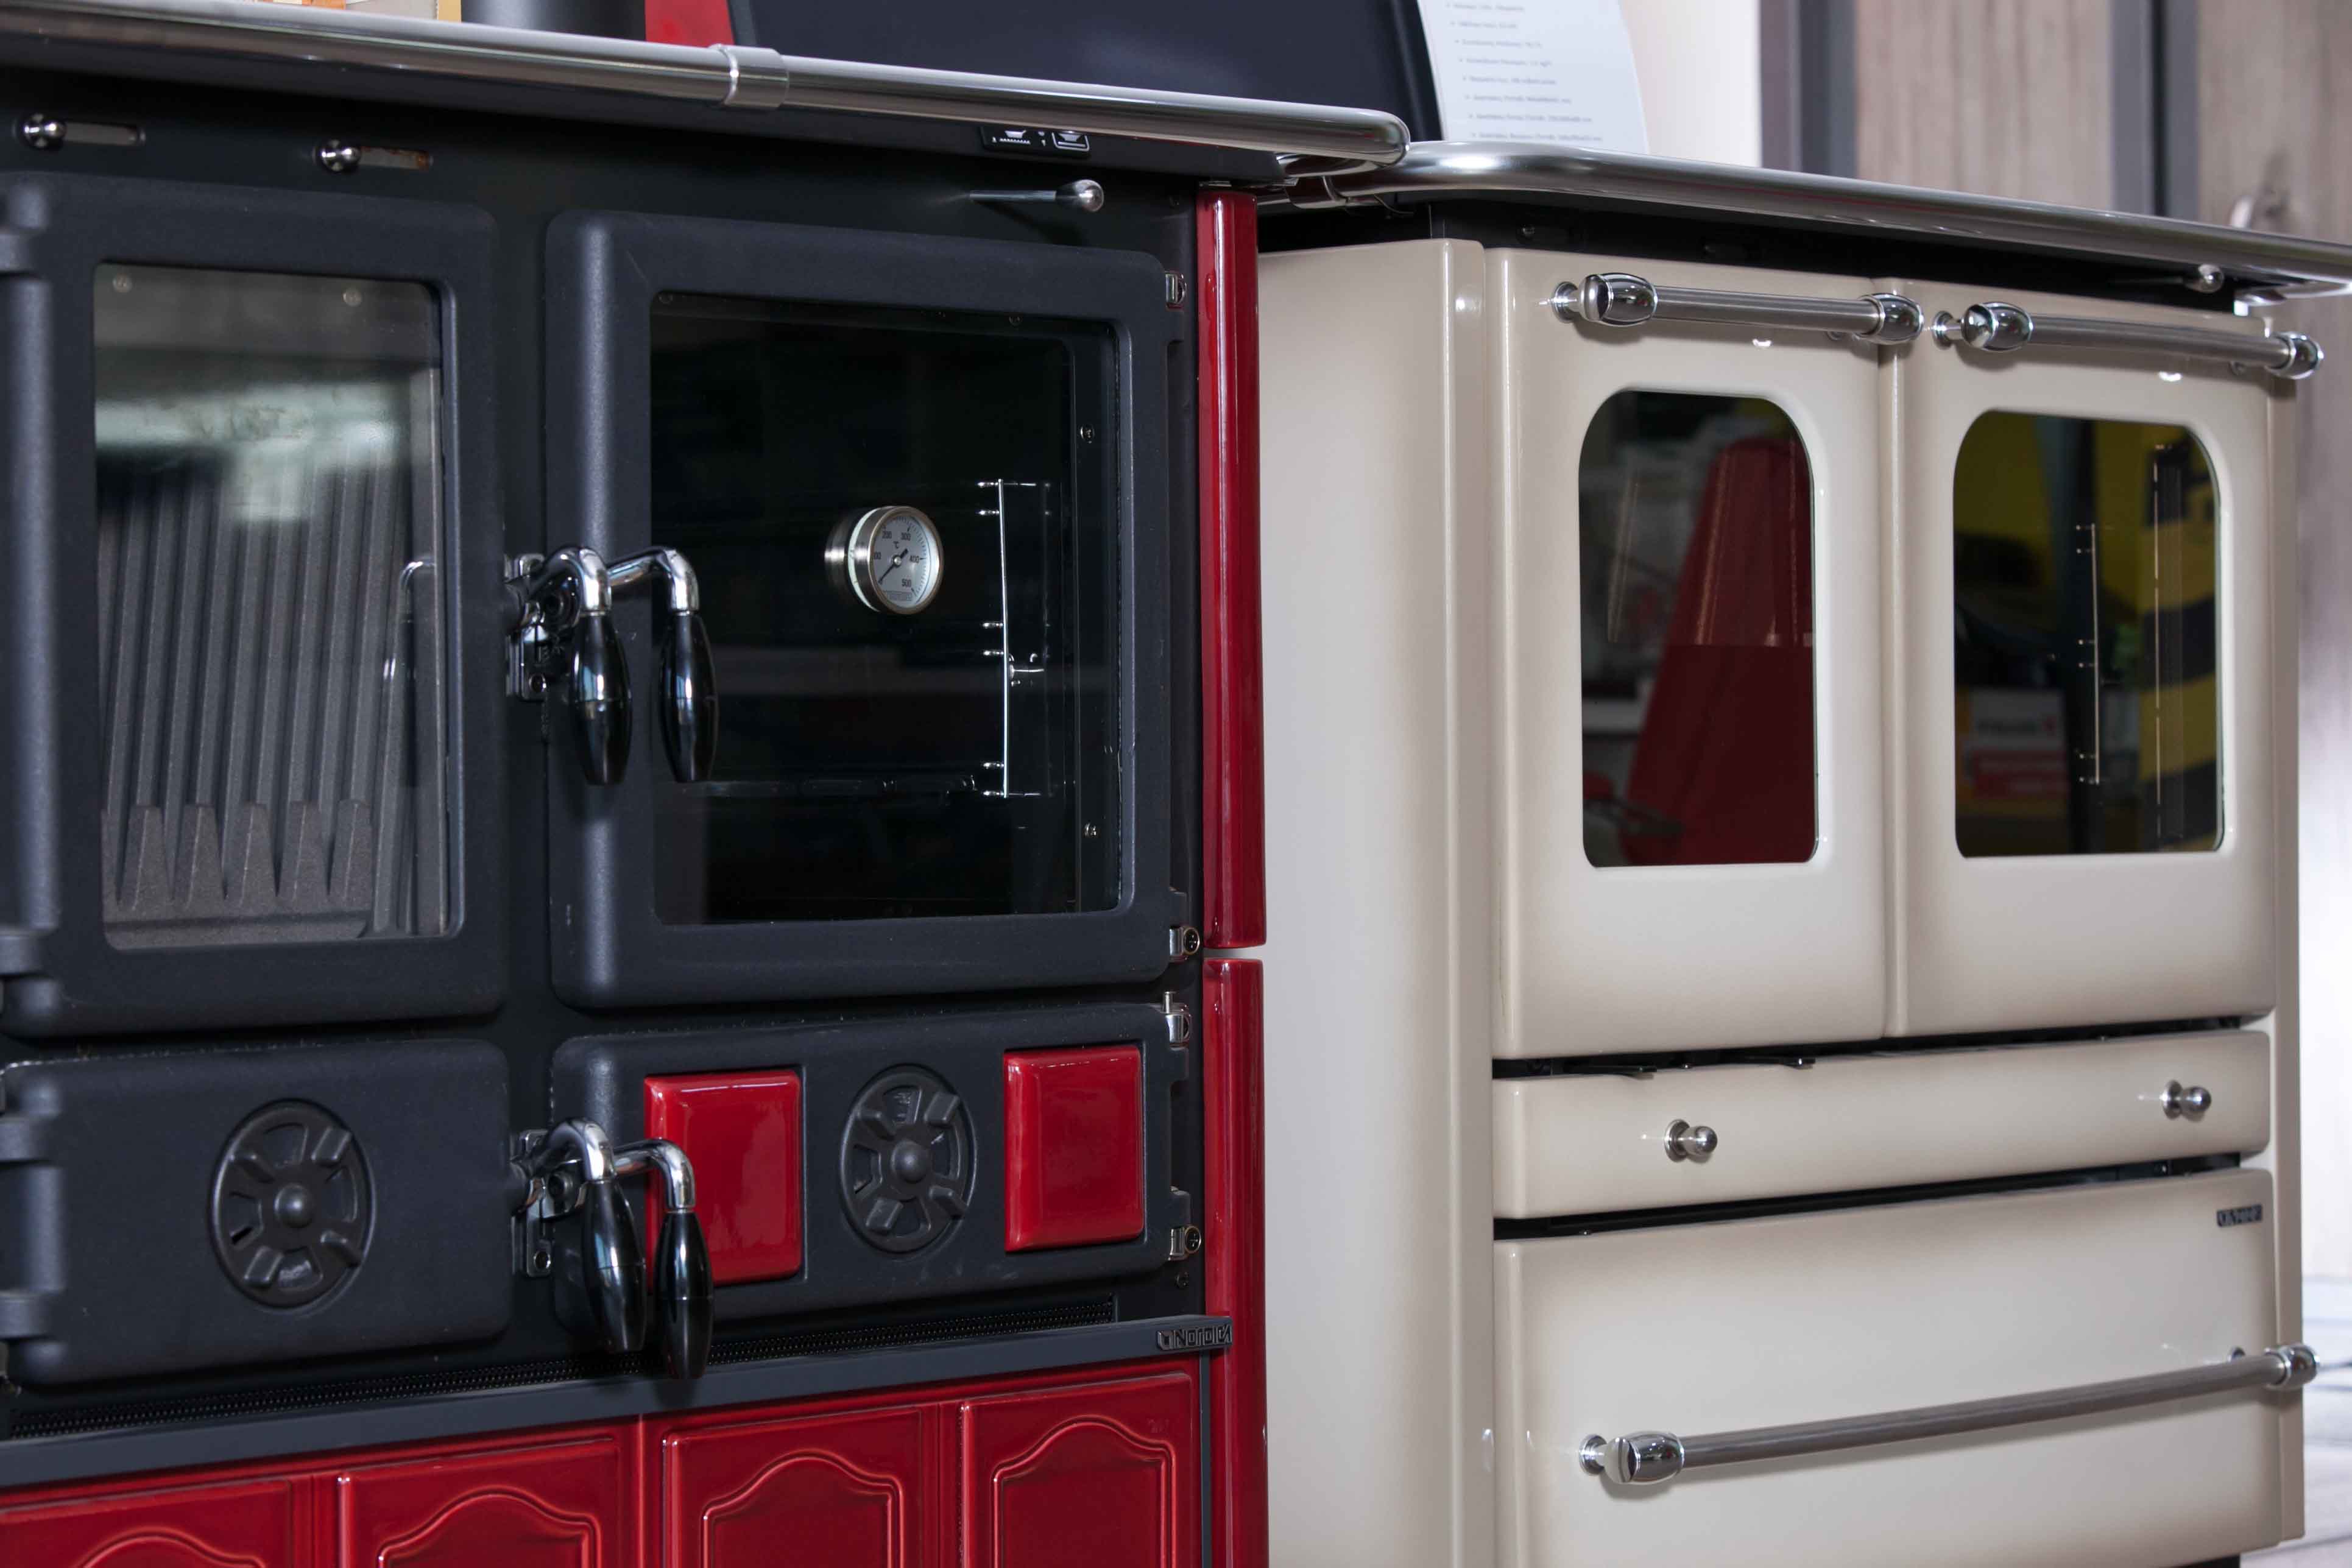 Wood Burning Cookers and Stoves with Oven